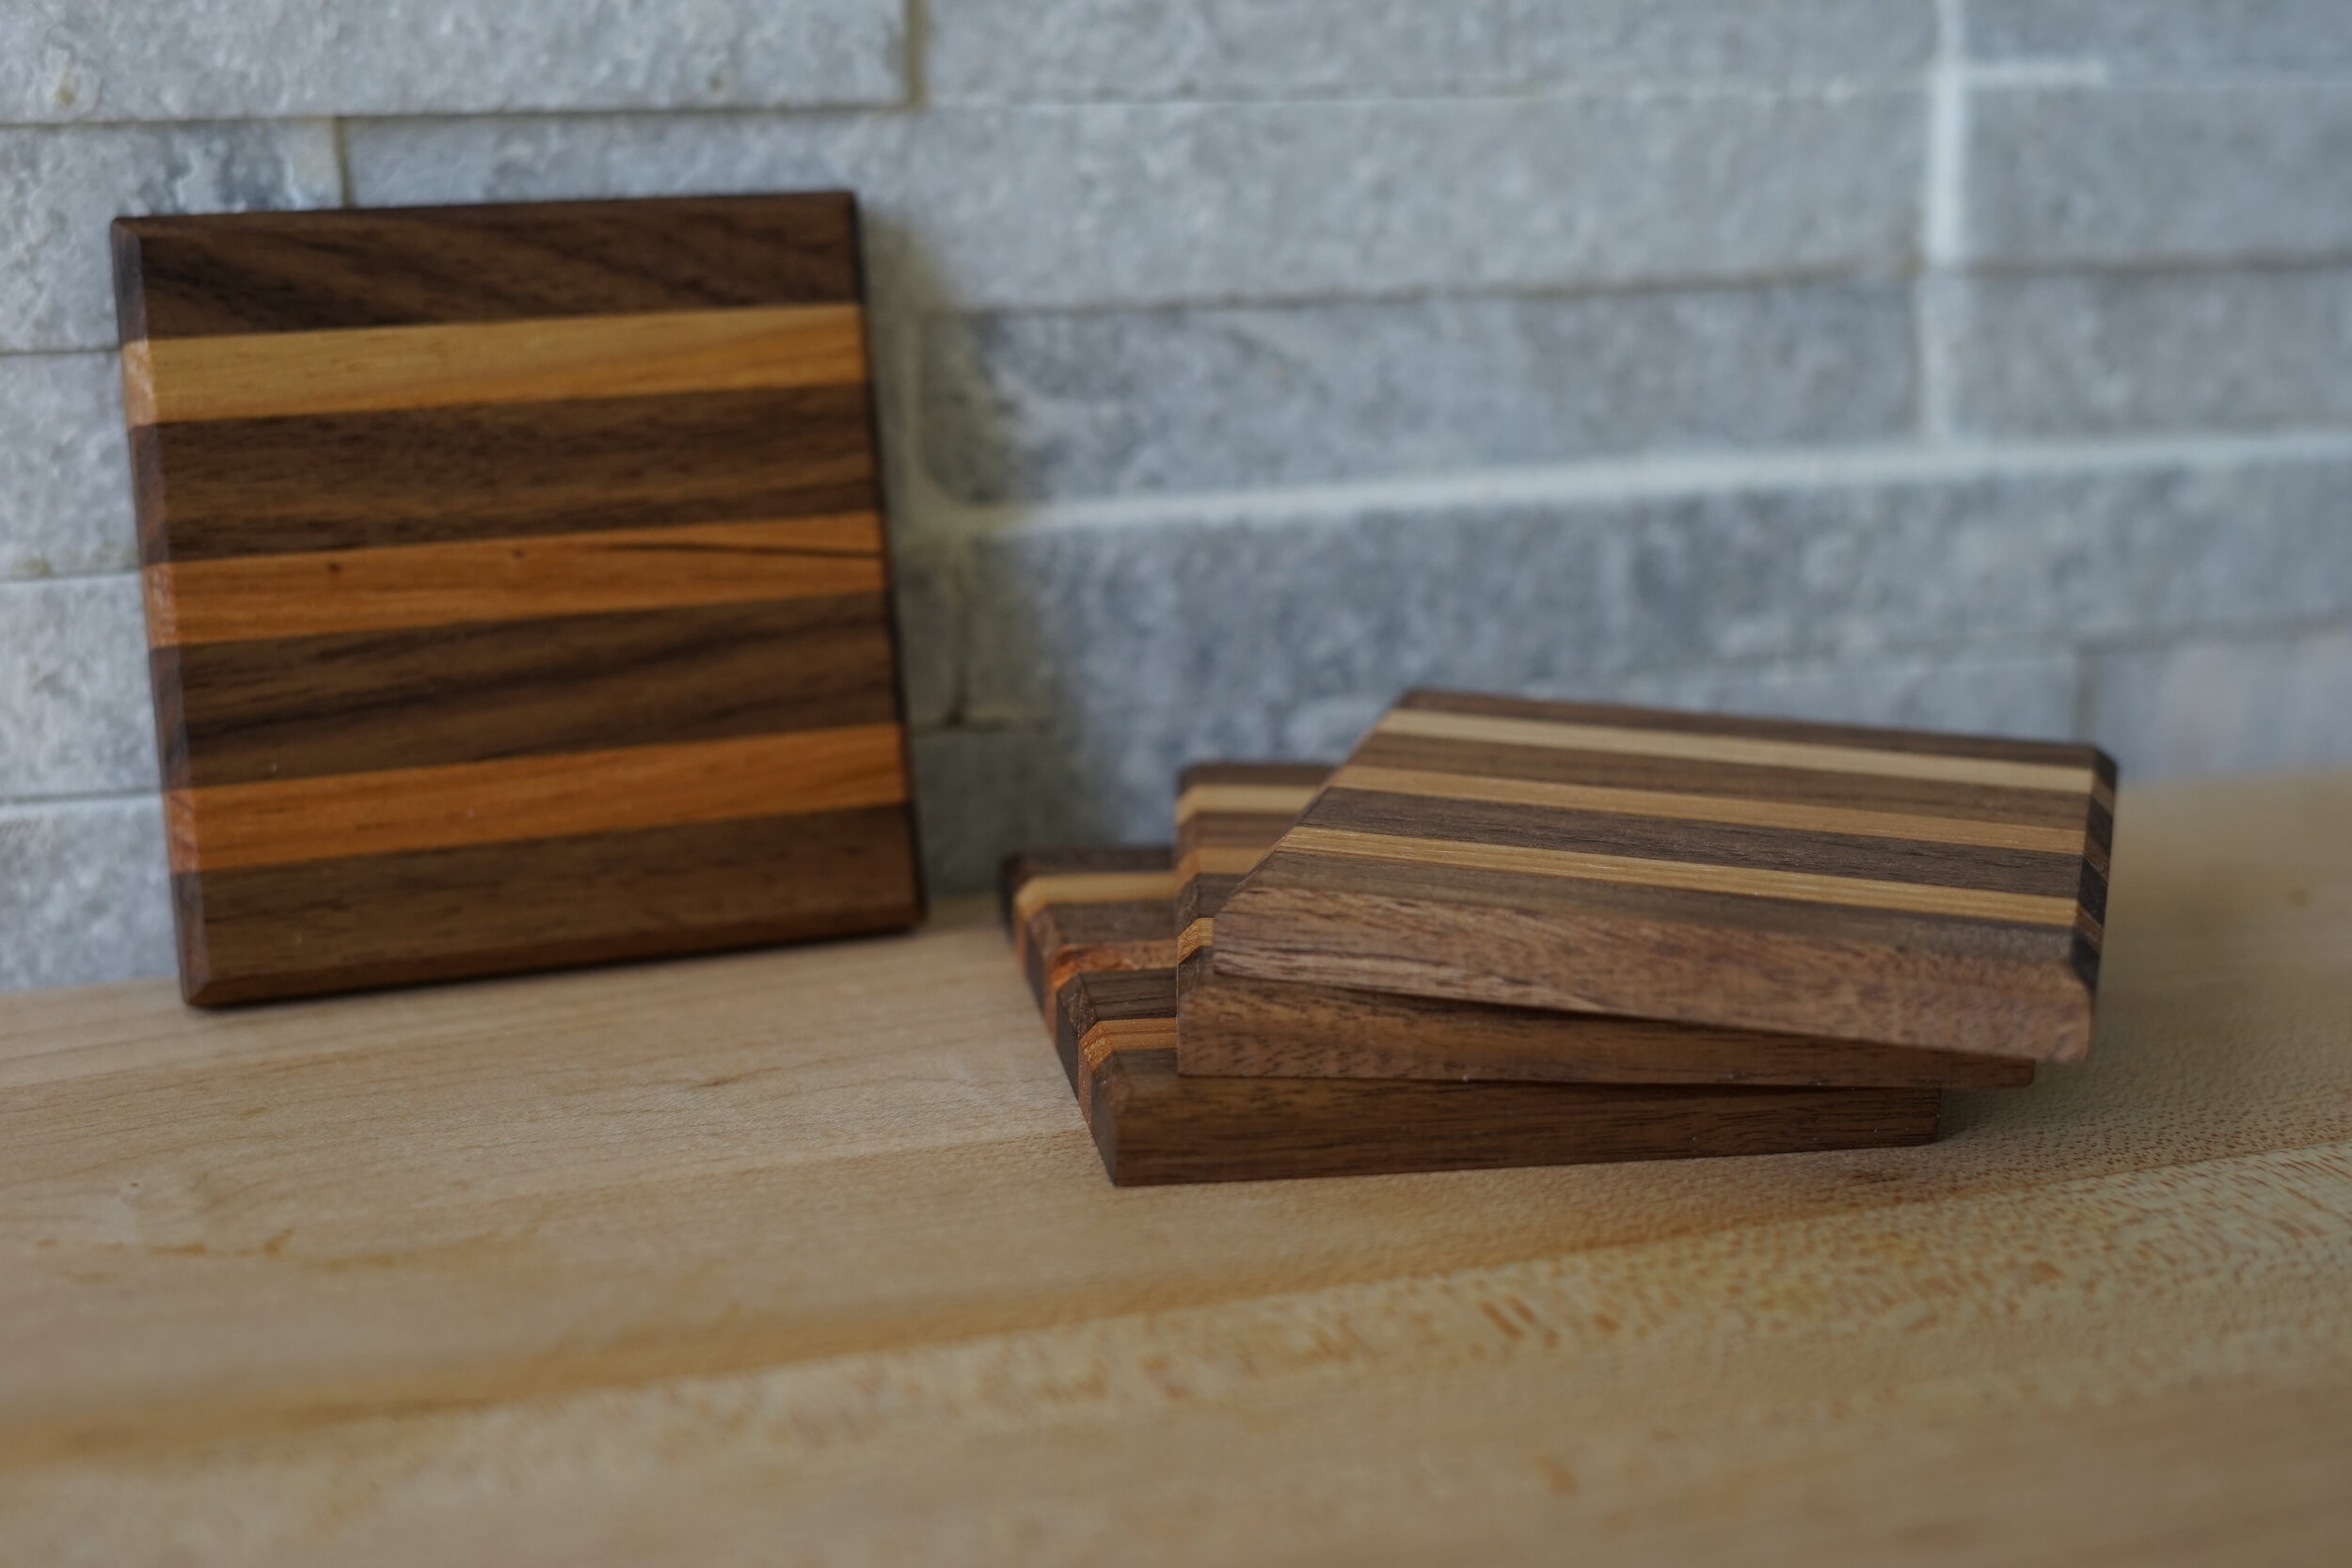 Maple/Walnut Square Coasters (set of 4) - Kitchen and Dining - Made by Him